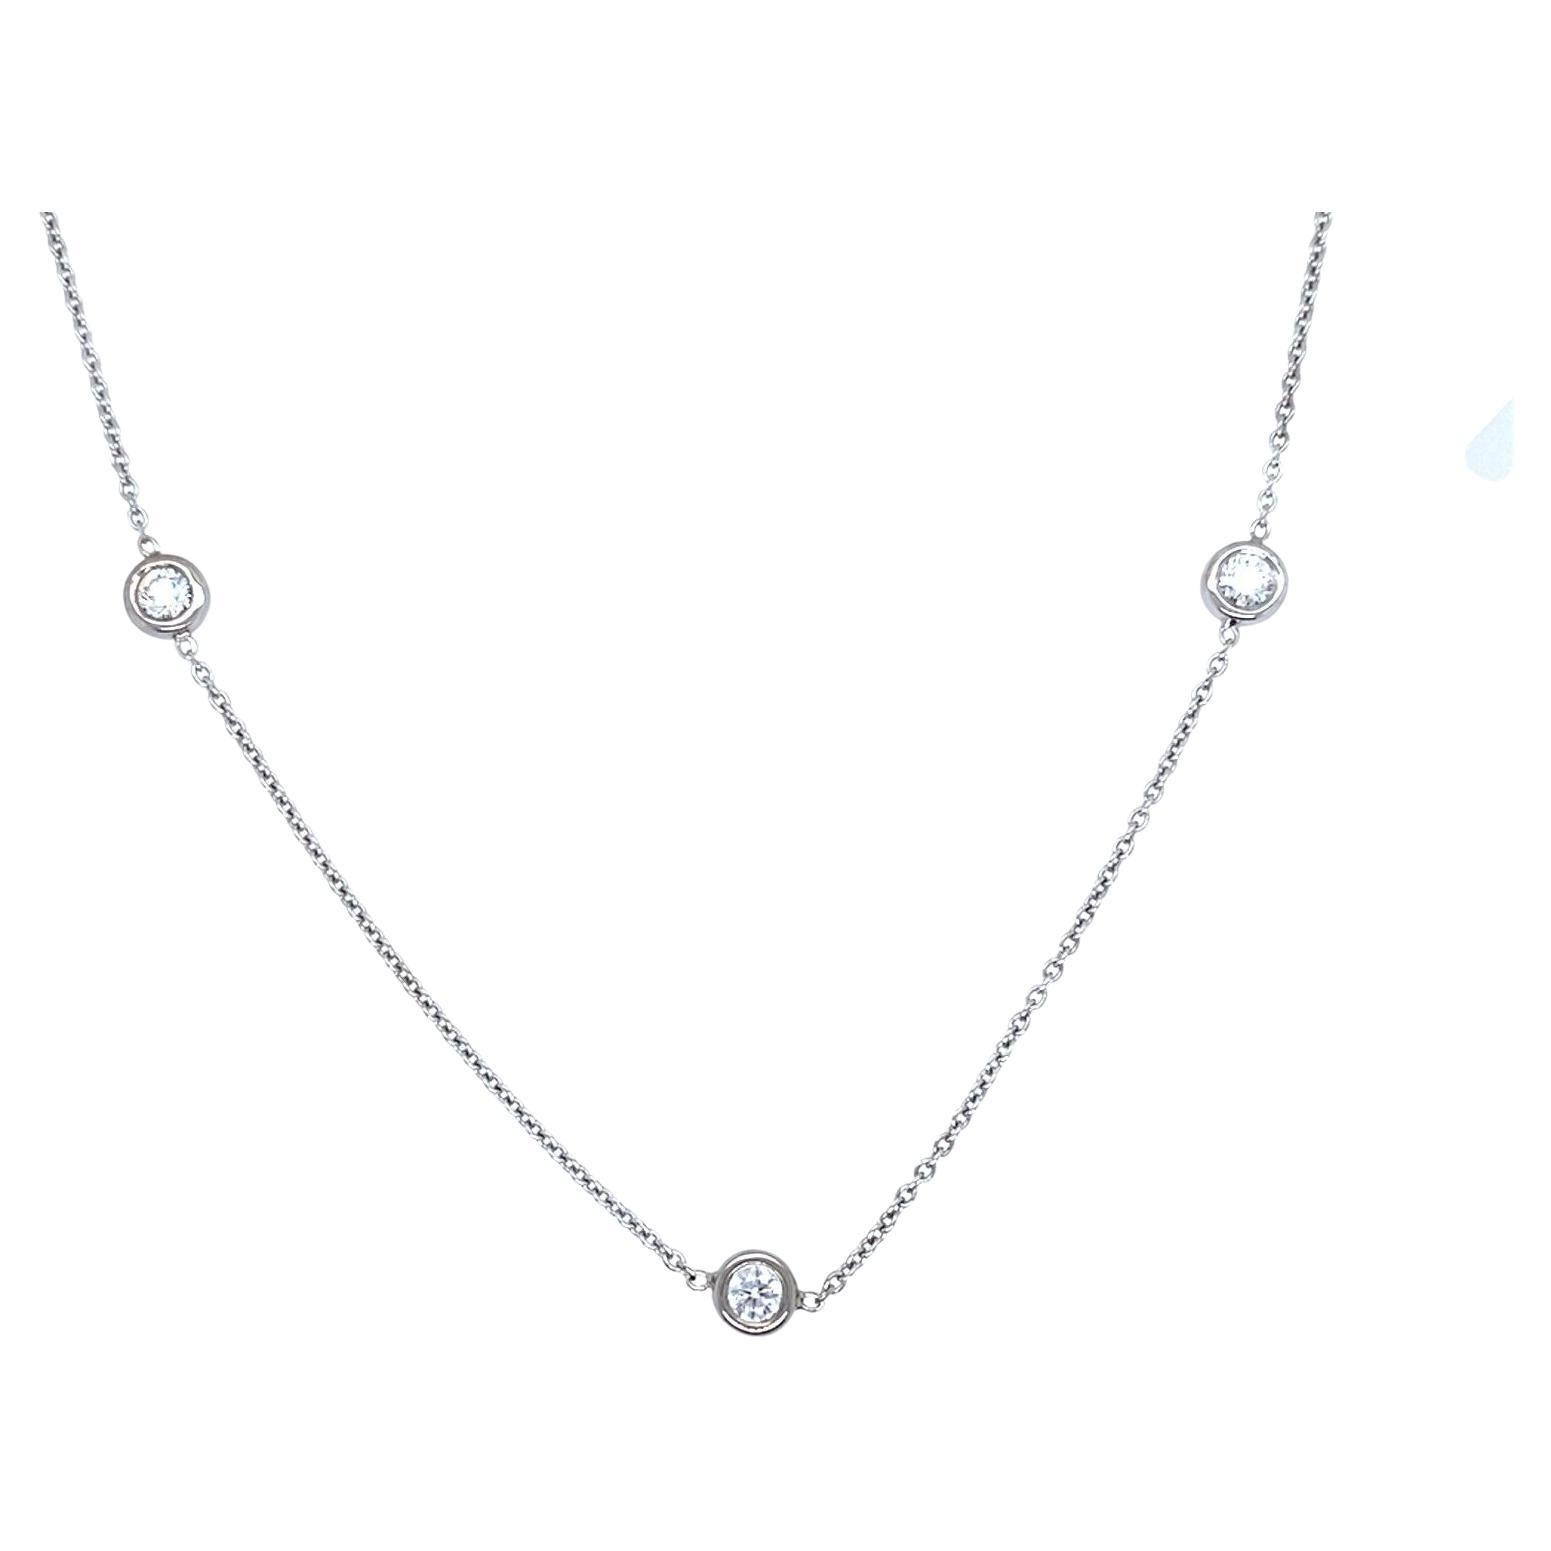 3-Stone Rubover Necklace Set with 0.50ct G/H SI Diamonds in 14ct White Gold